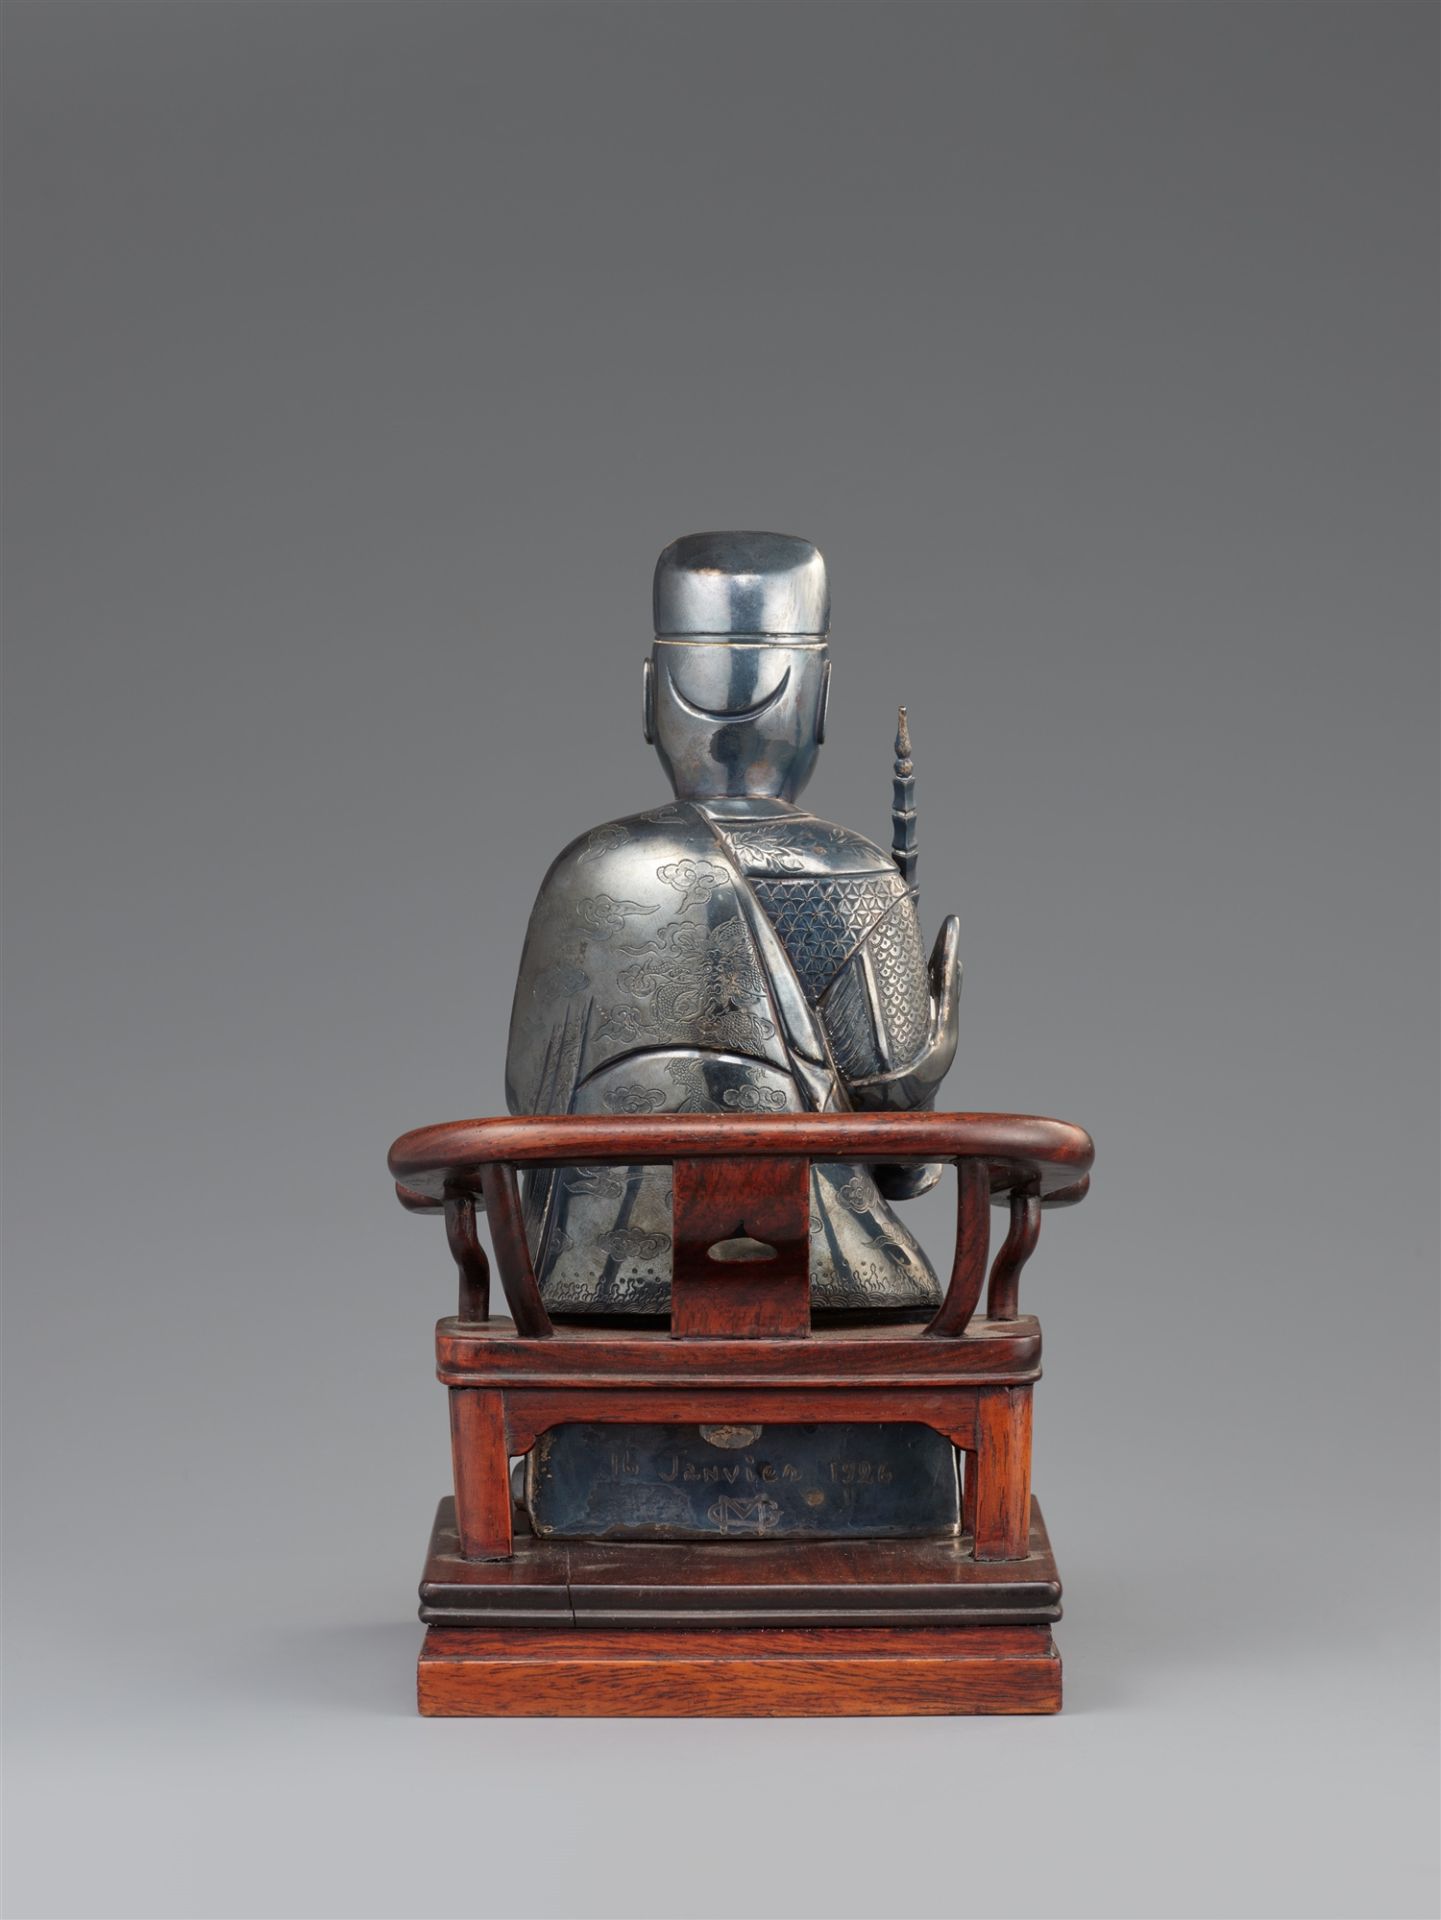 A hollow-cast silver figure of a dignitary on a wooden chair. Shanghai. Around 1900 - Image 2 of 2